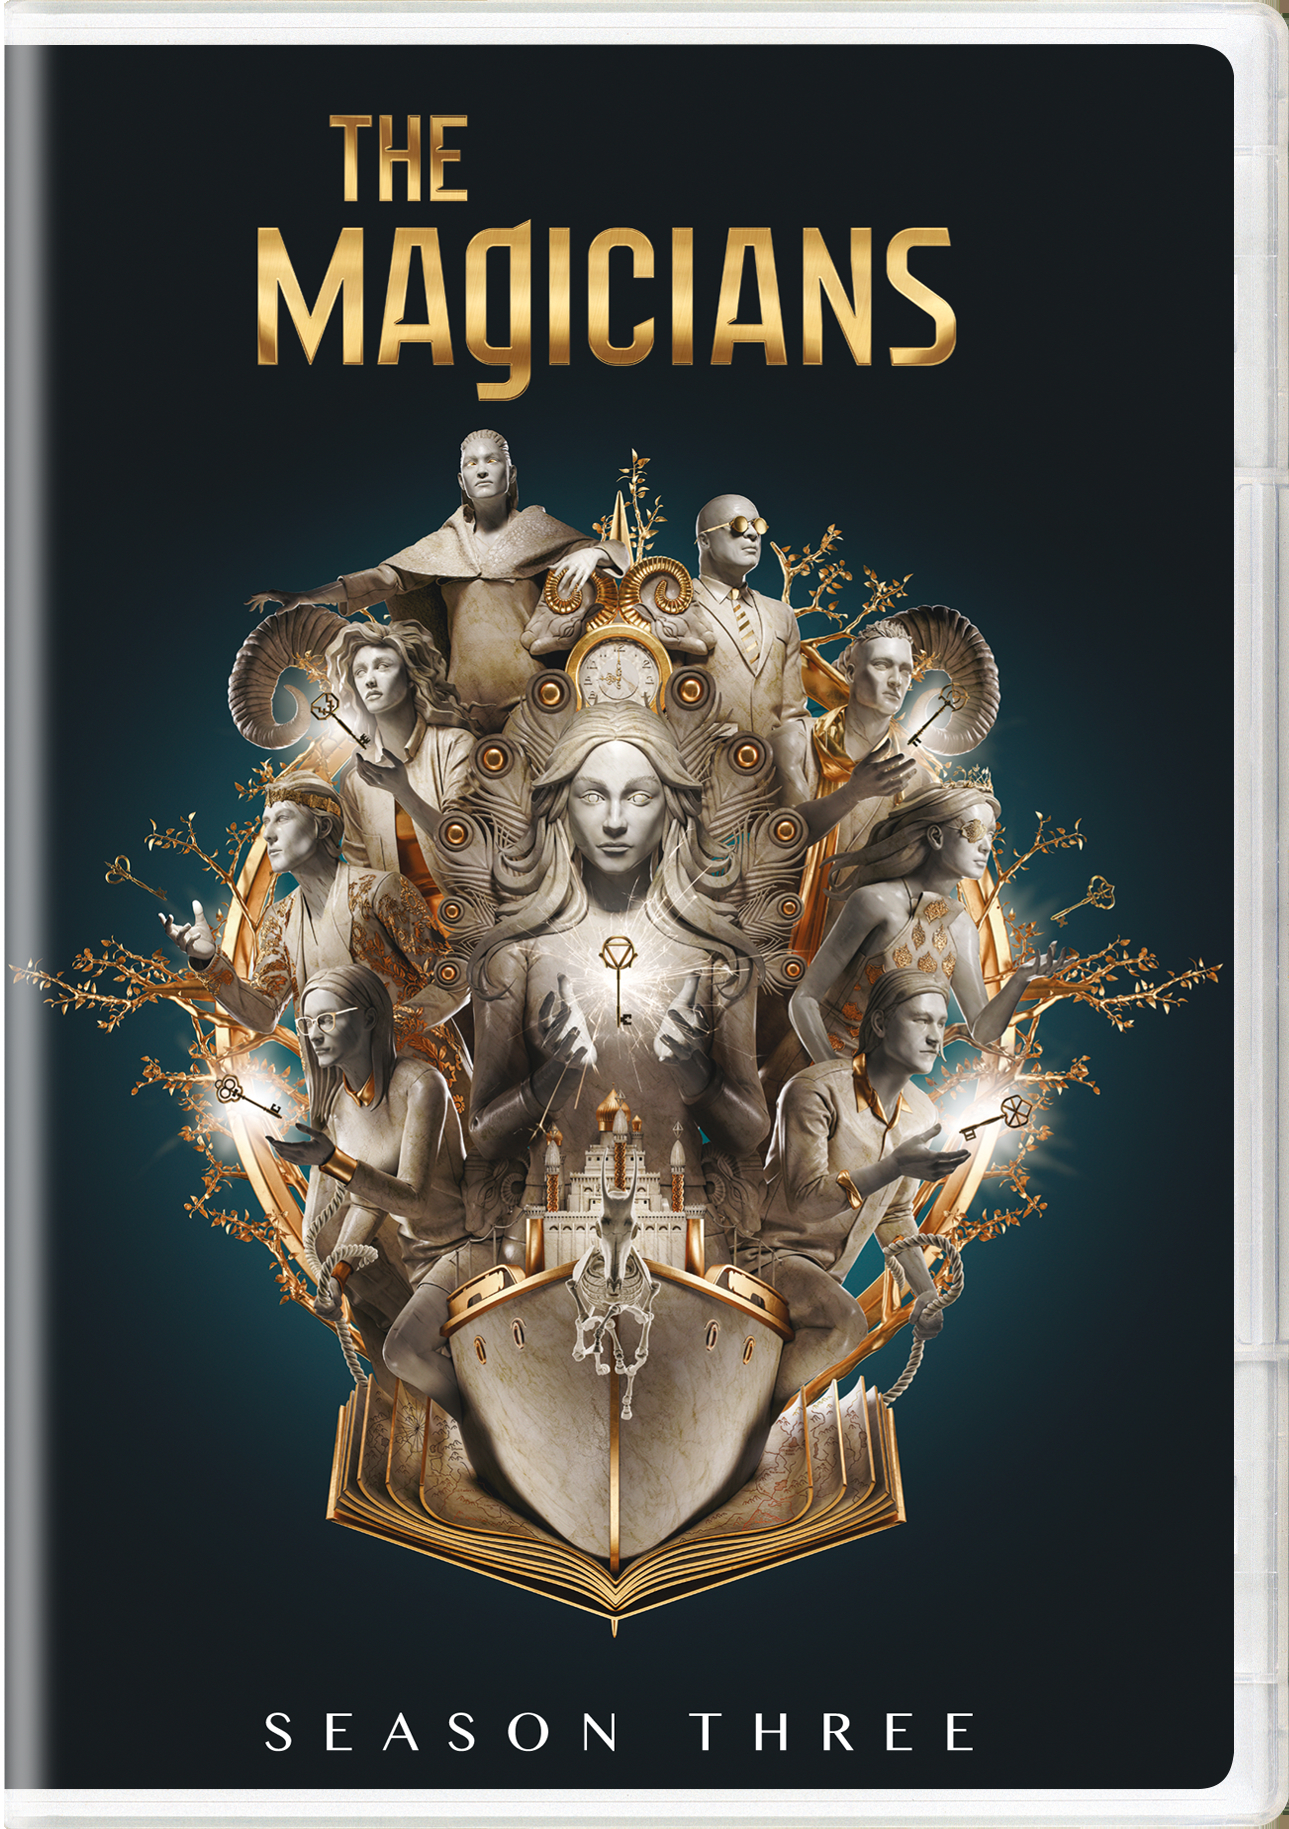 The Magicians: Season Three - DVD [ 2018 ]  - Drama Television On DVD - TV Shows On GRUV